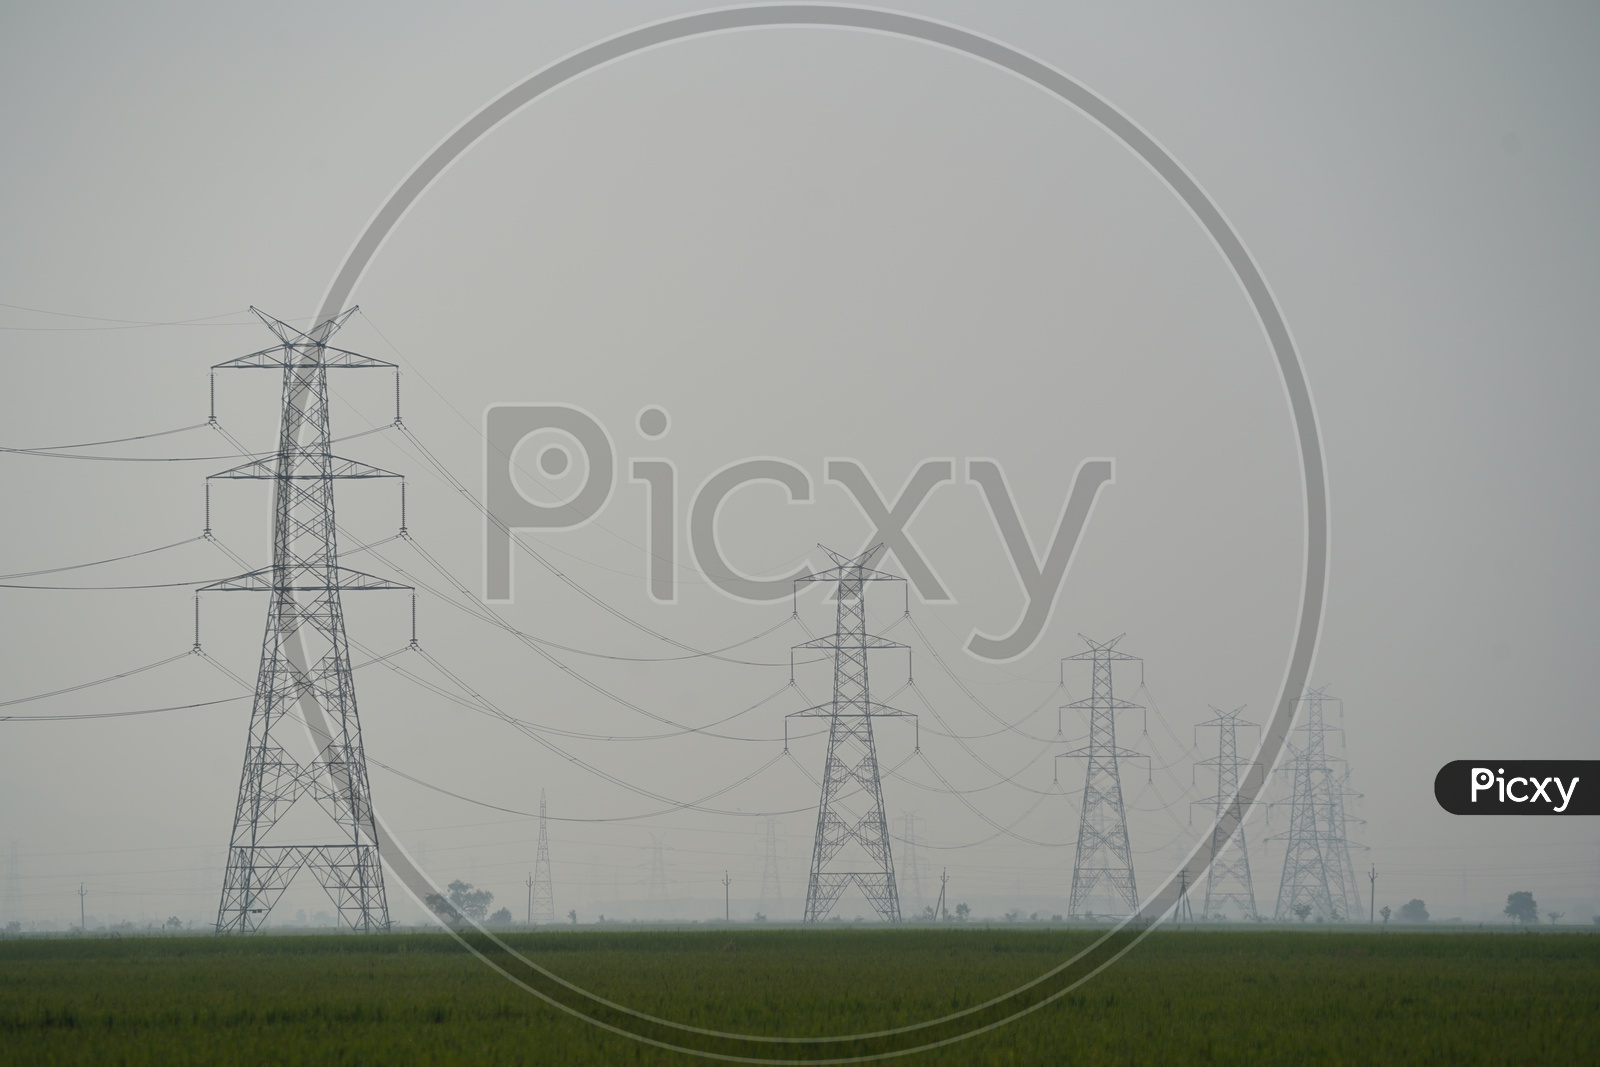 Power Transmission Lines near Agriculture Fields